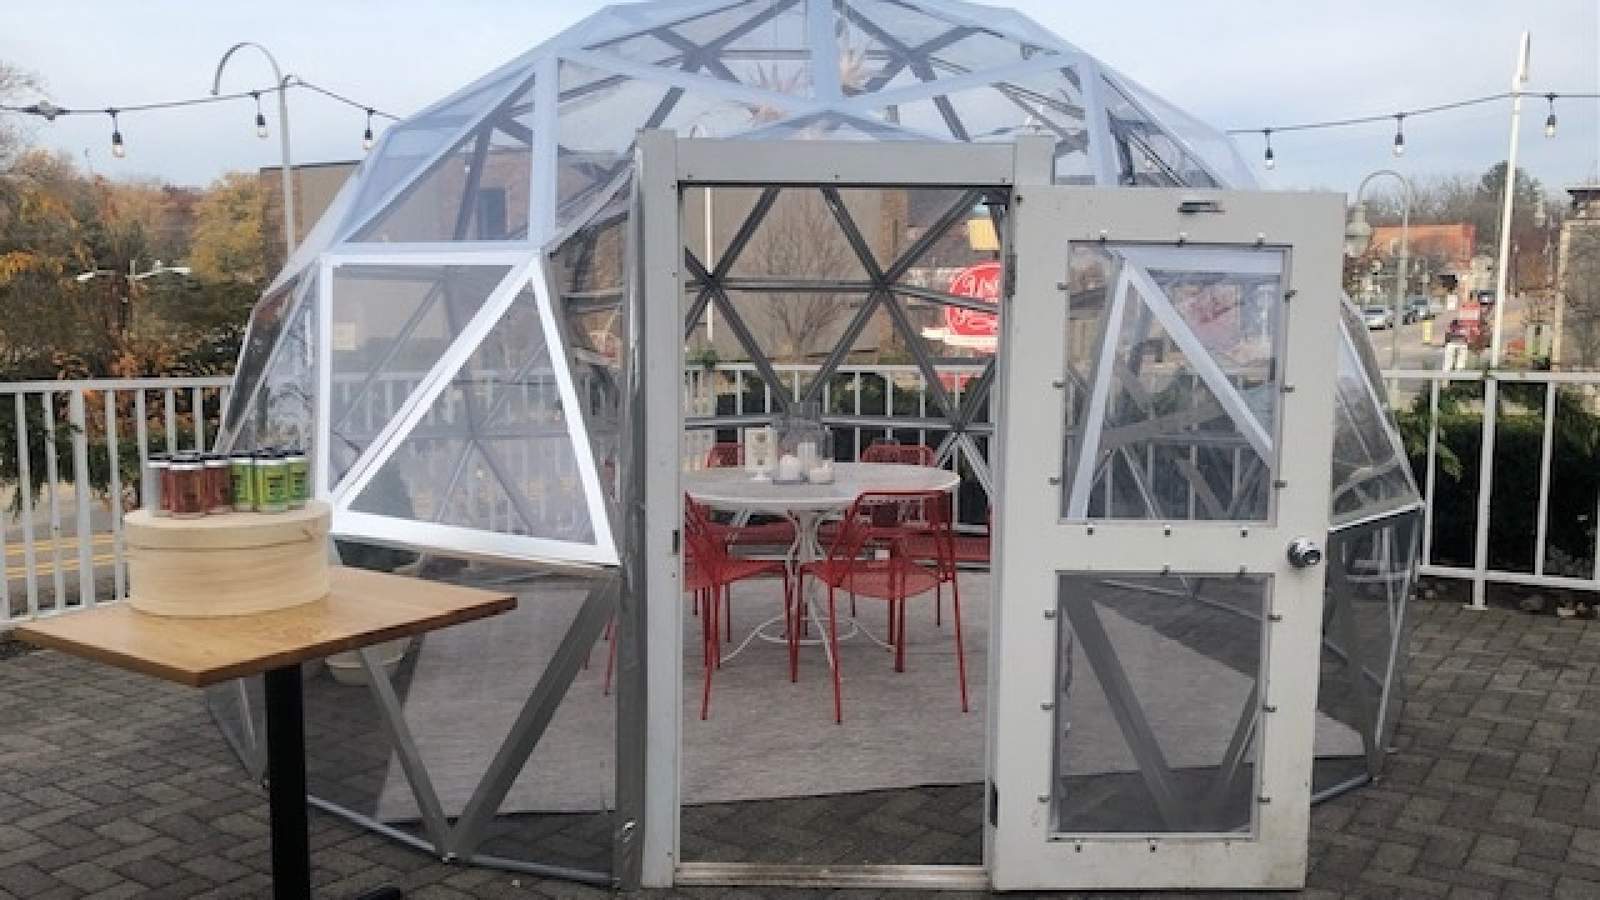 Union Joint restaurants are keeping it cool (and safe) in their igloos